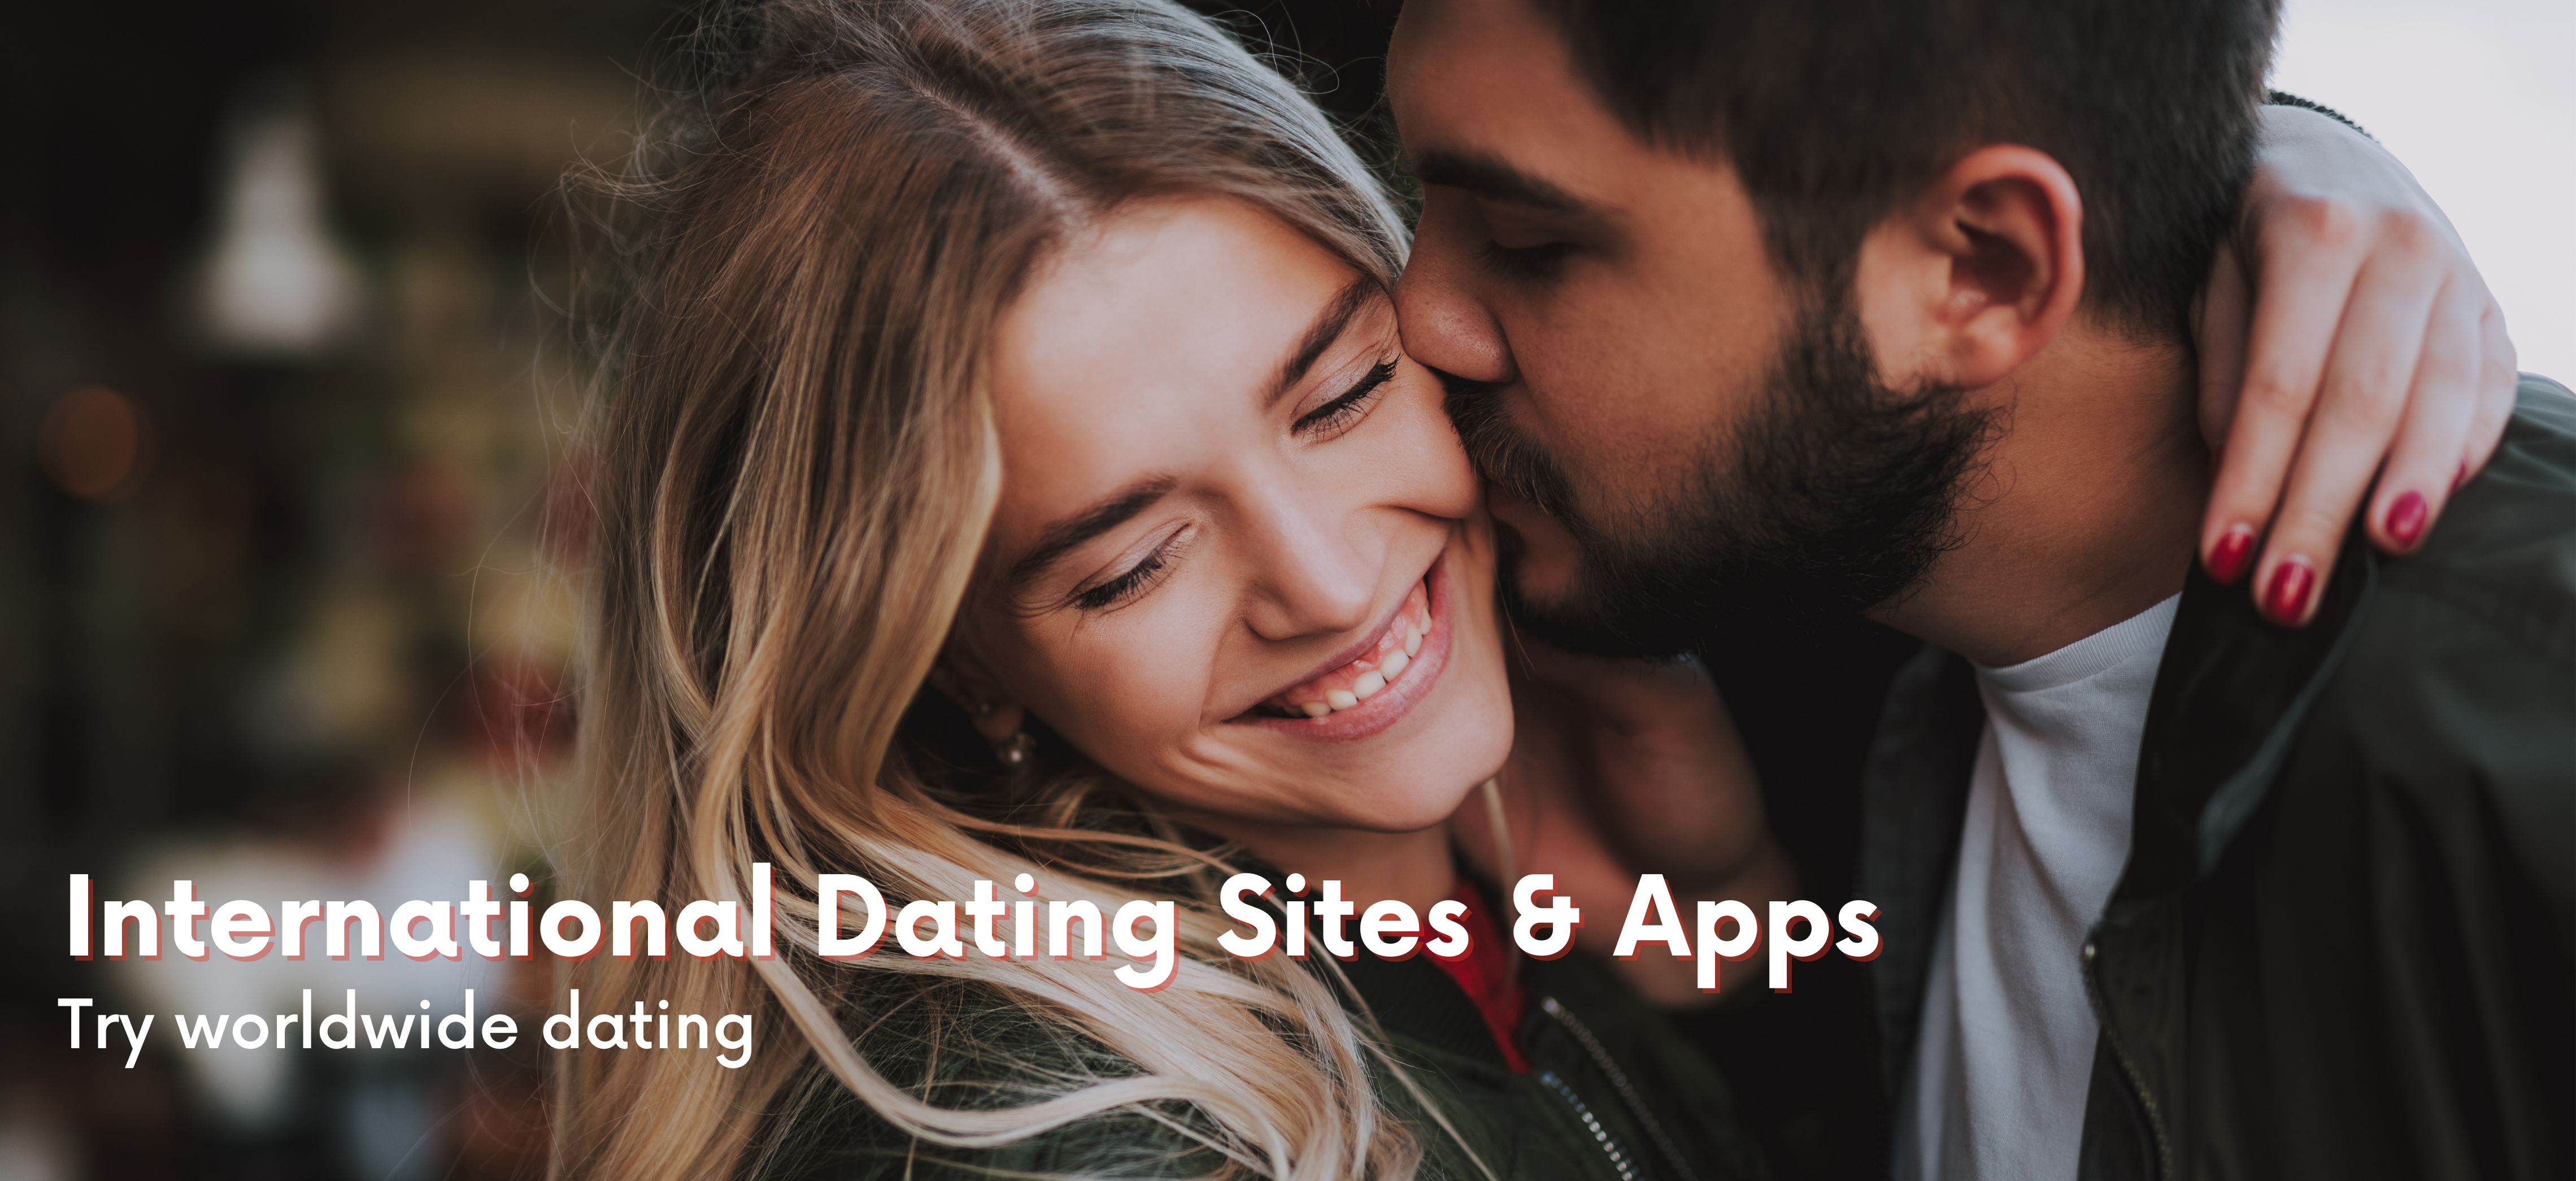 International Dating Sites & Apps